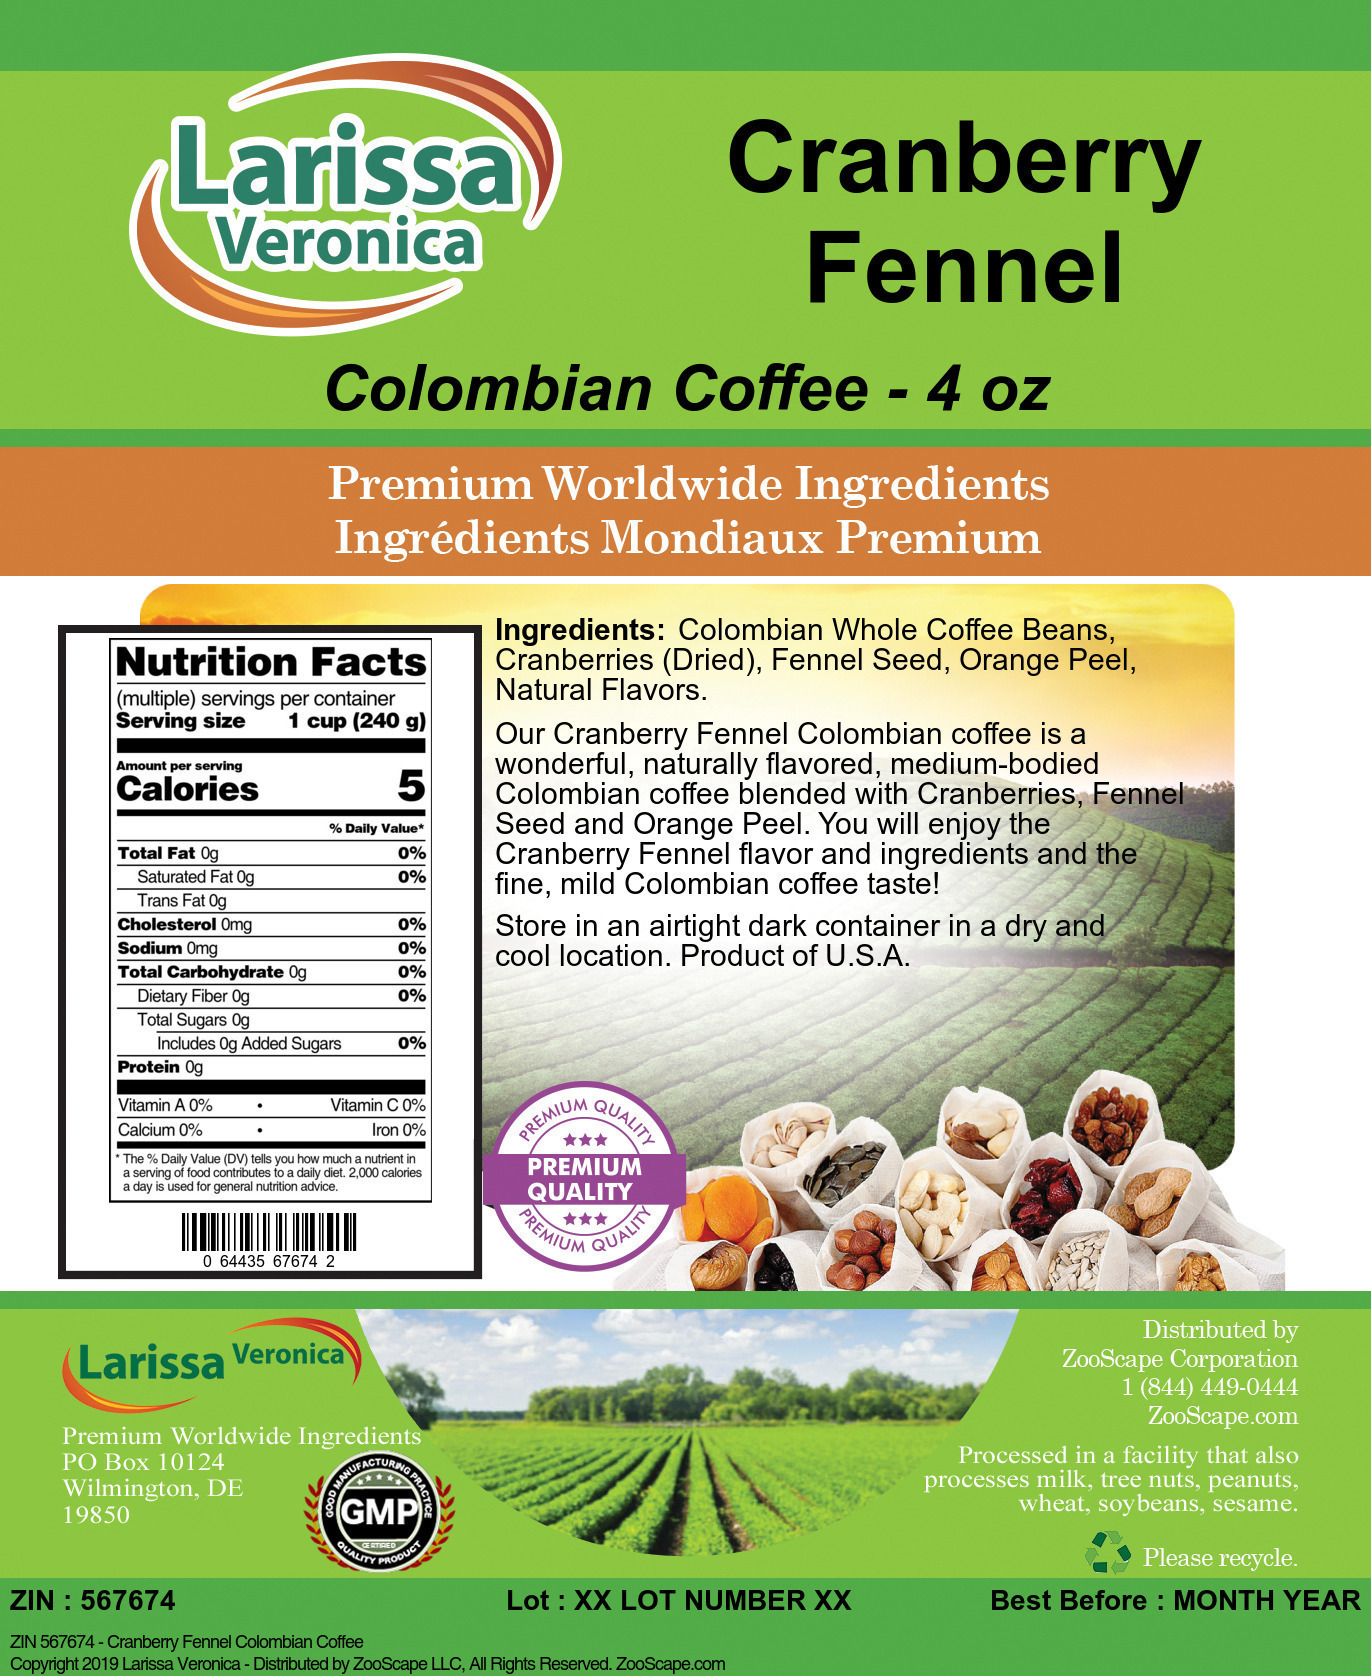 Cranberry Fennel Colombian Coffee - Label